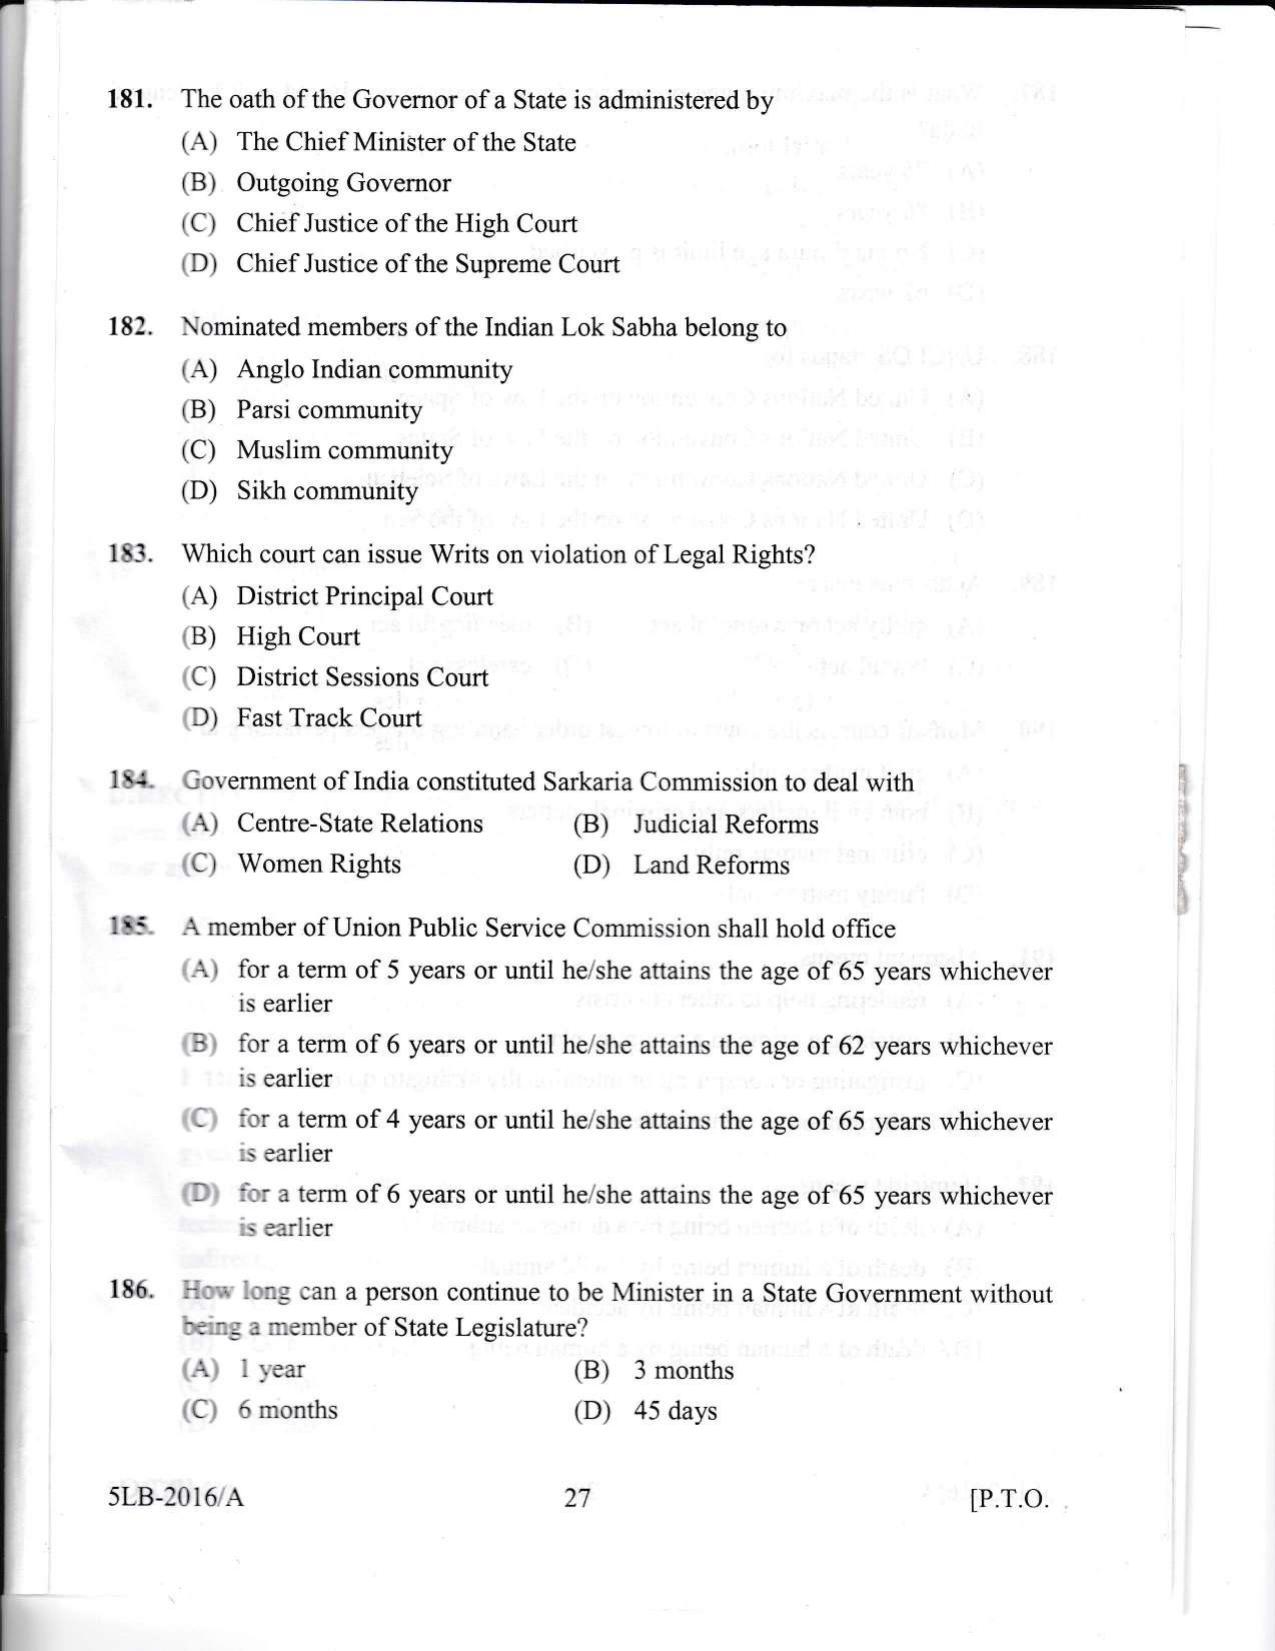 KLEE 5 Year LLB Exam 2016 Question Paper - Page 27